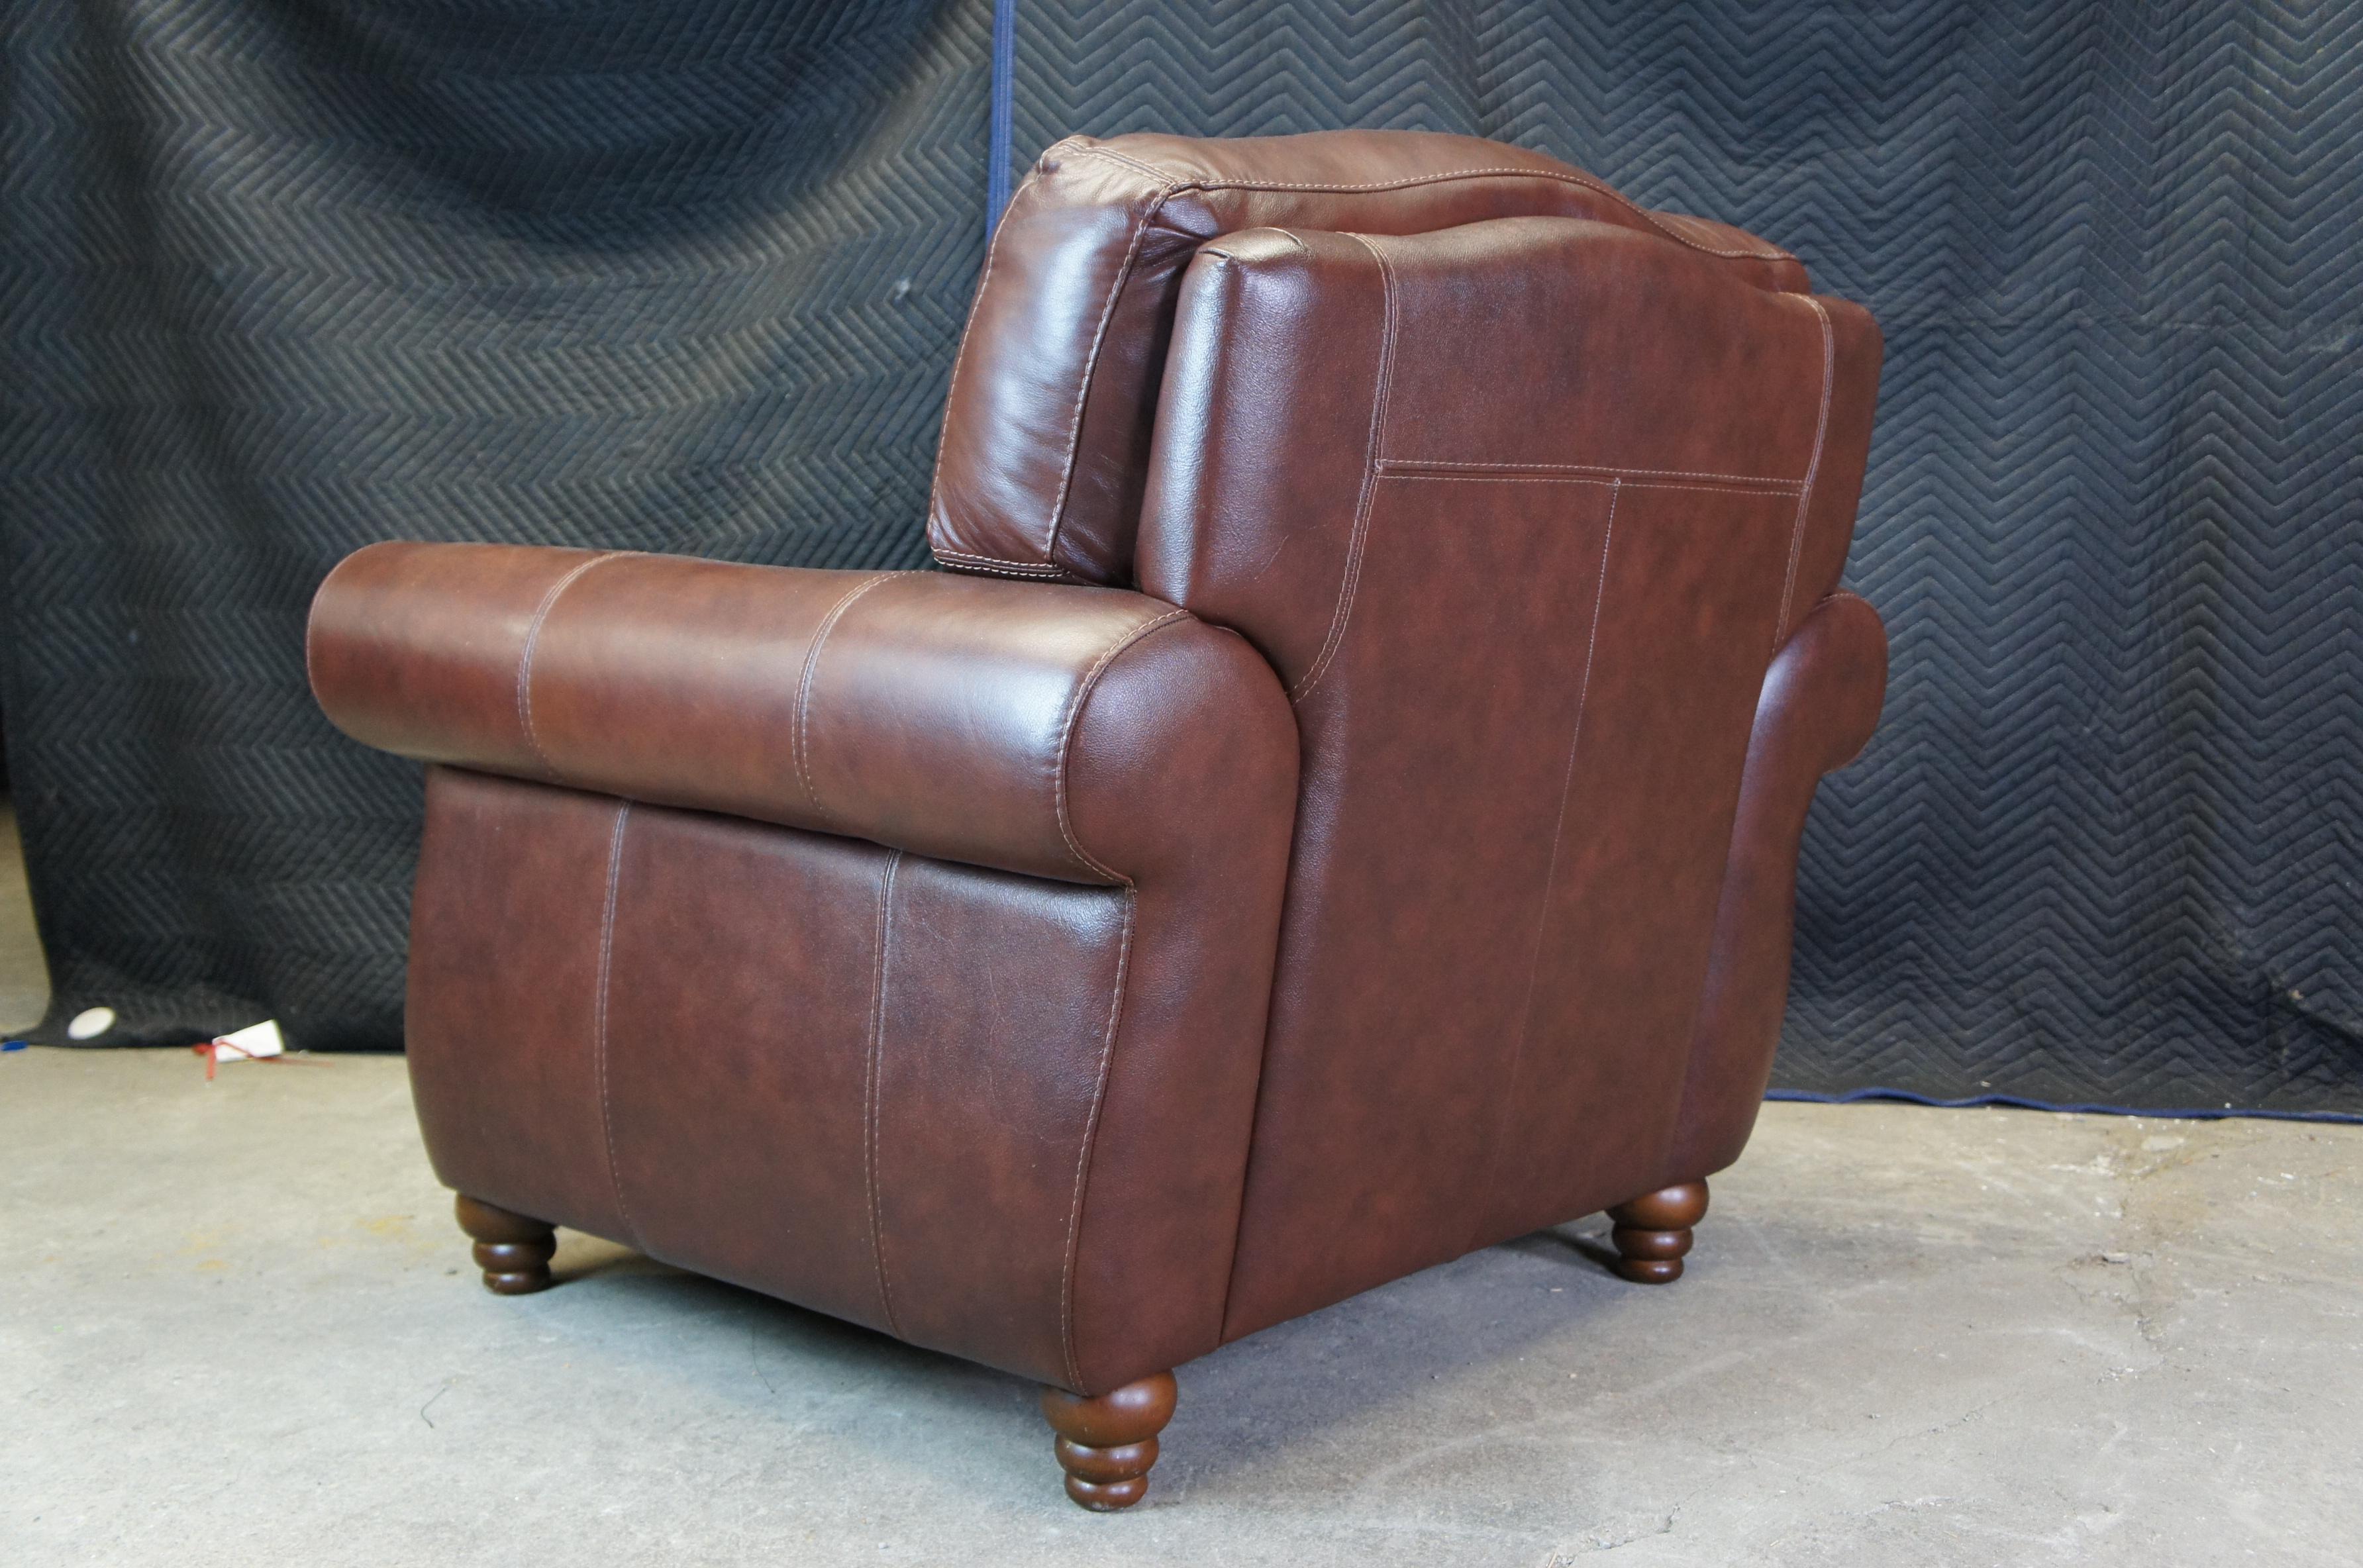 Vintage Chateau D'Ax Divani Italian Brown Leather Library Club Rolled Arm Chair 1